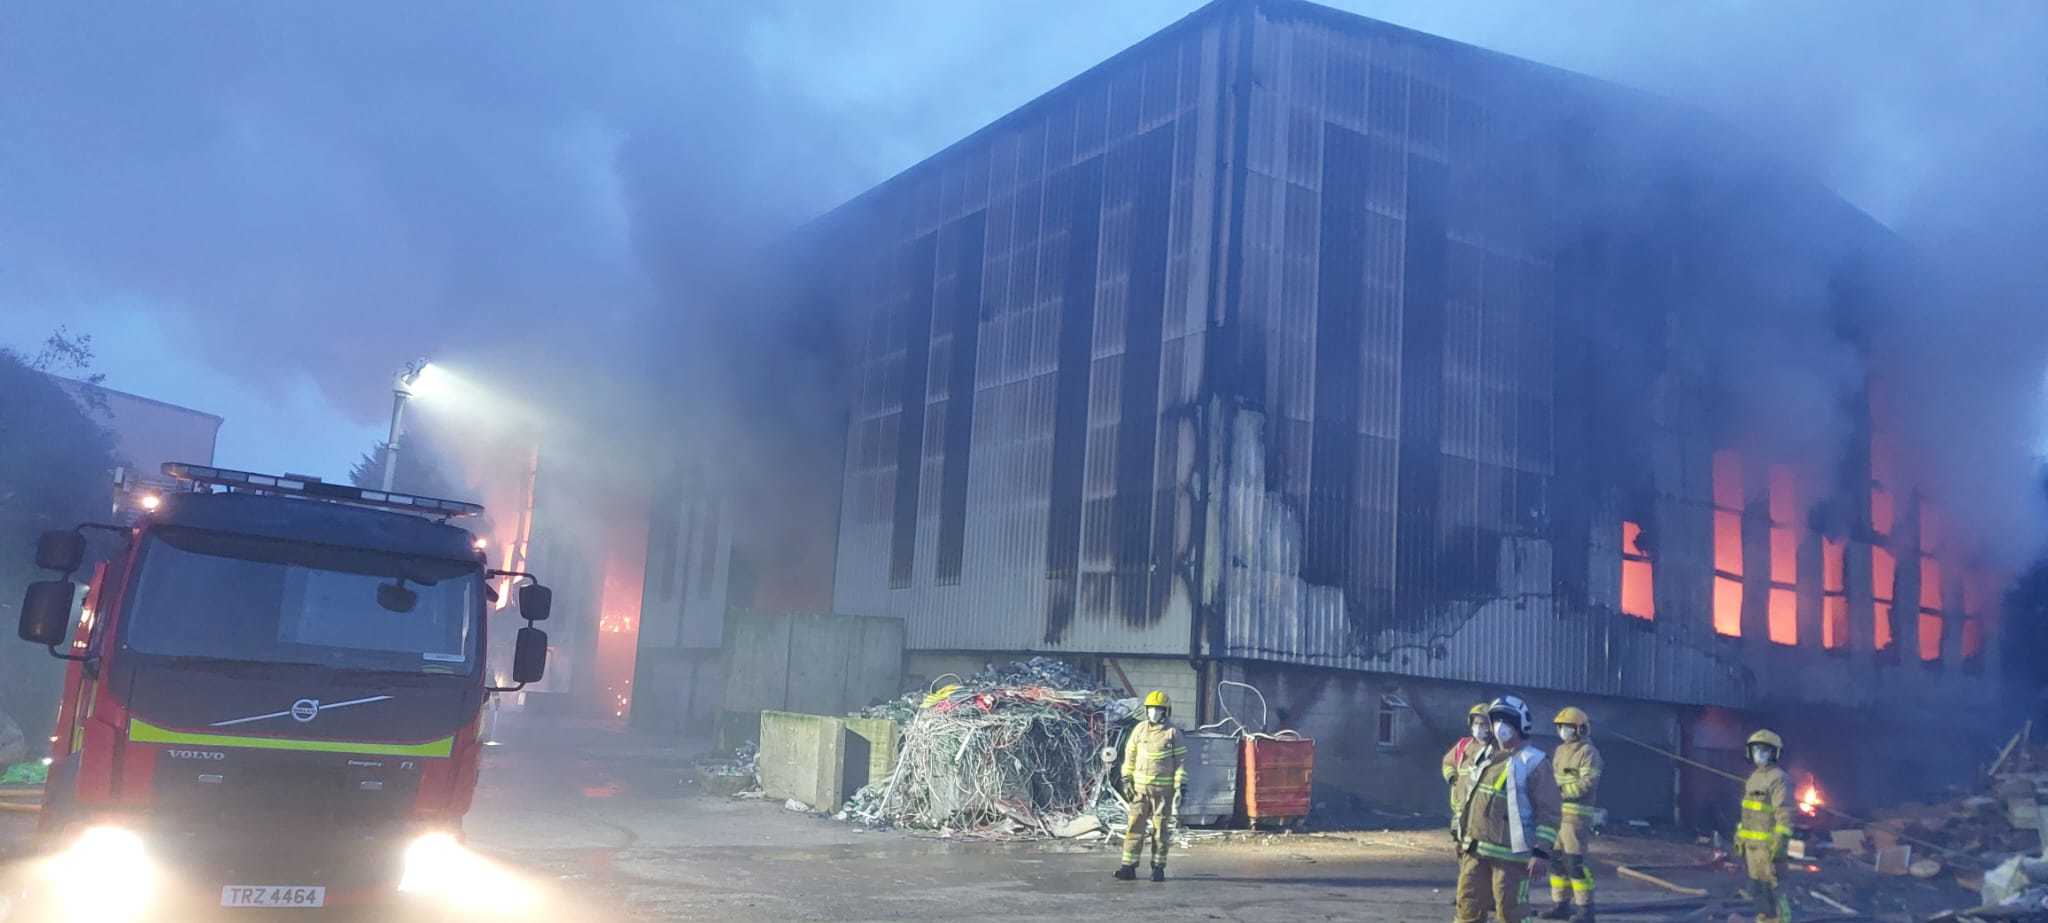 Firefighters tackle a blaze at Skip Services Enniskillen. Photo: Northern Ireland Fire and Rescue Service.